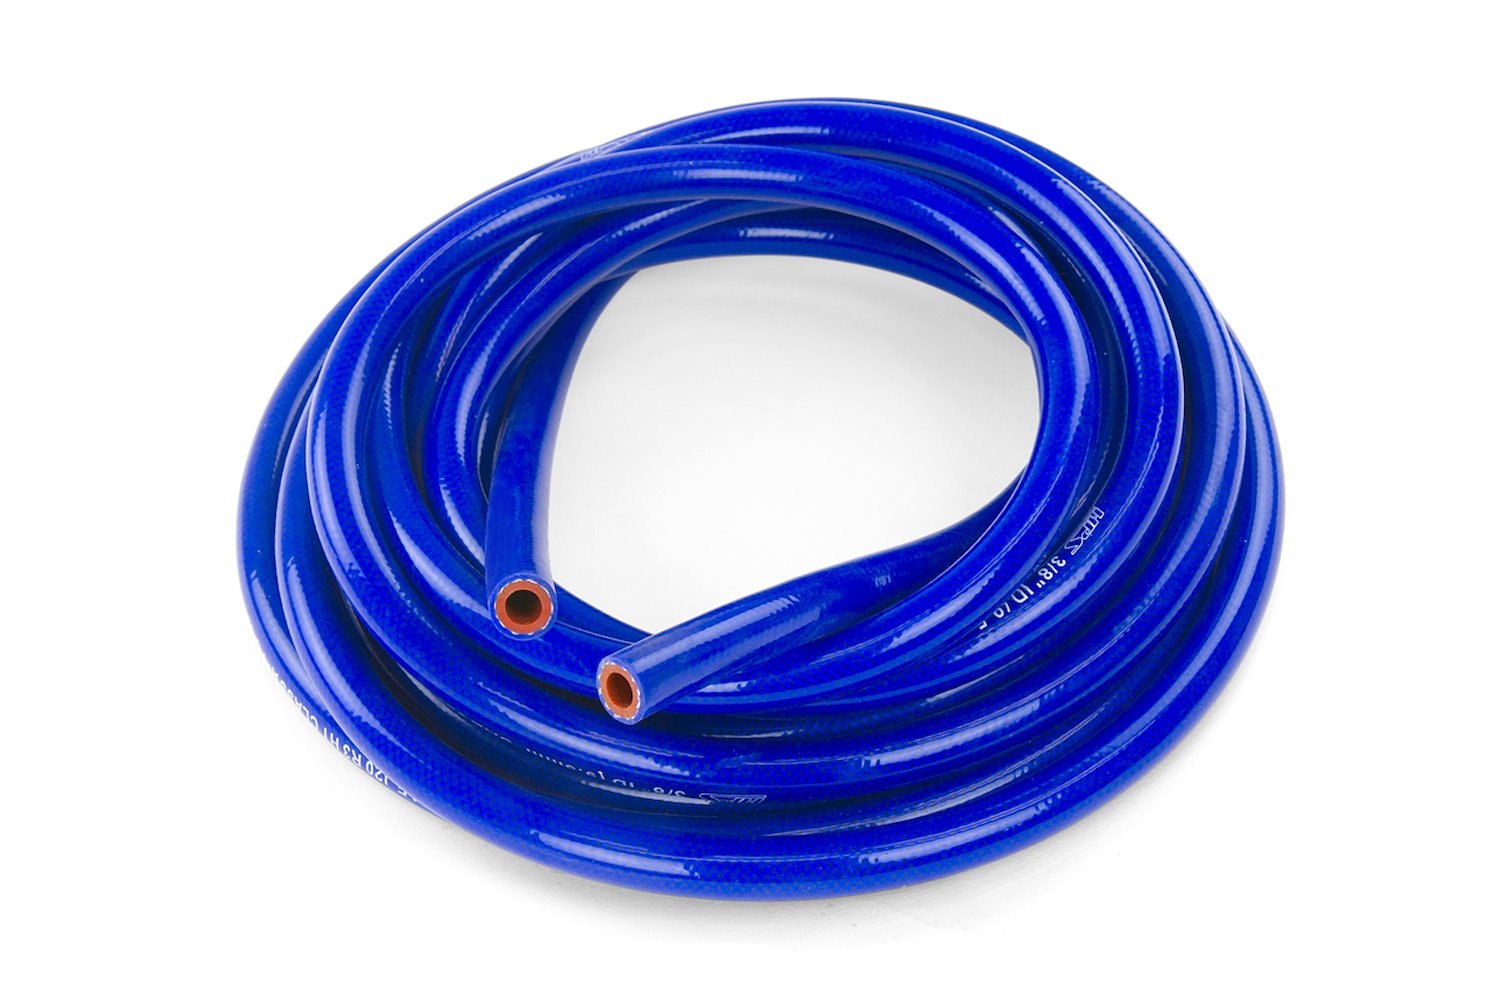 HTHH-062-BLUEx25 Silicone Heater Hose Tubing, High-Temp 1-Ply Reinforced, 5/8 in. ID, 25 ft. Roll, Blue